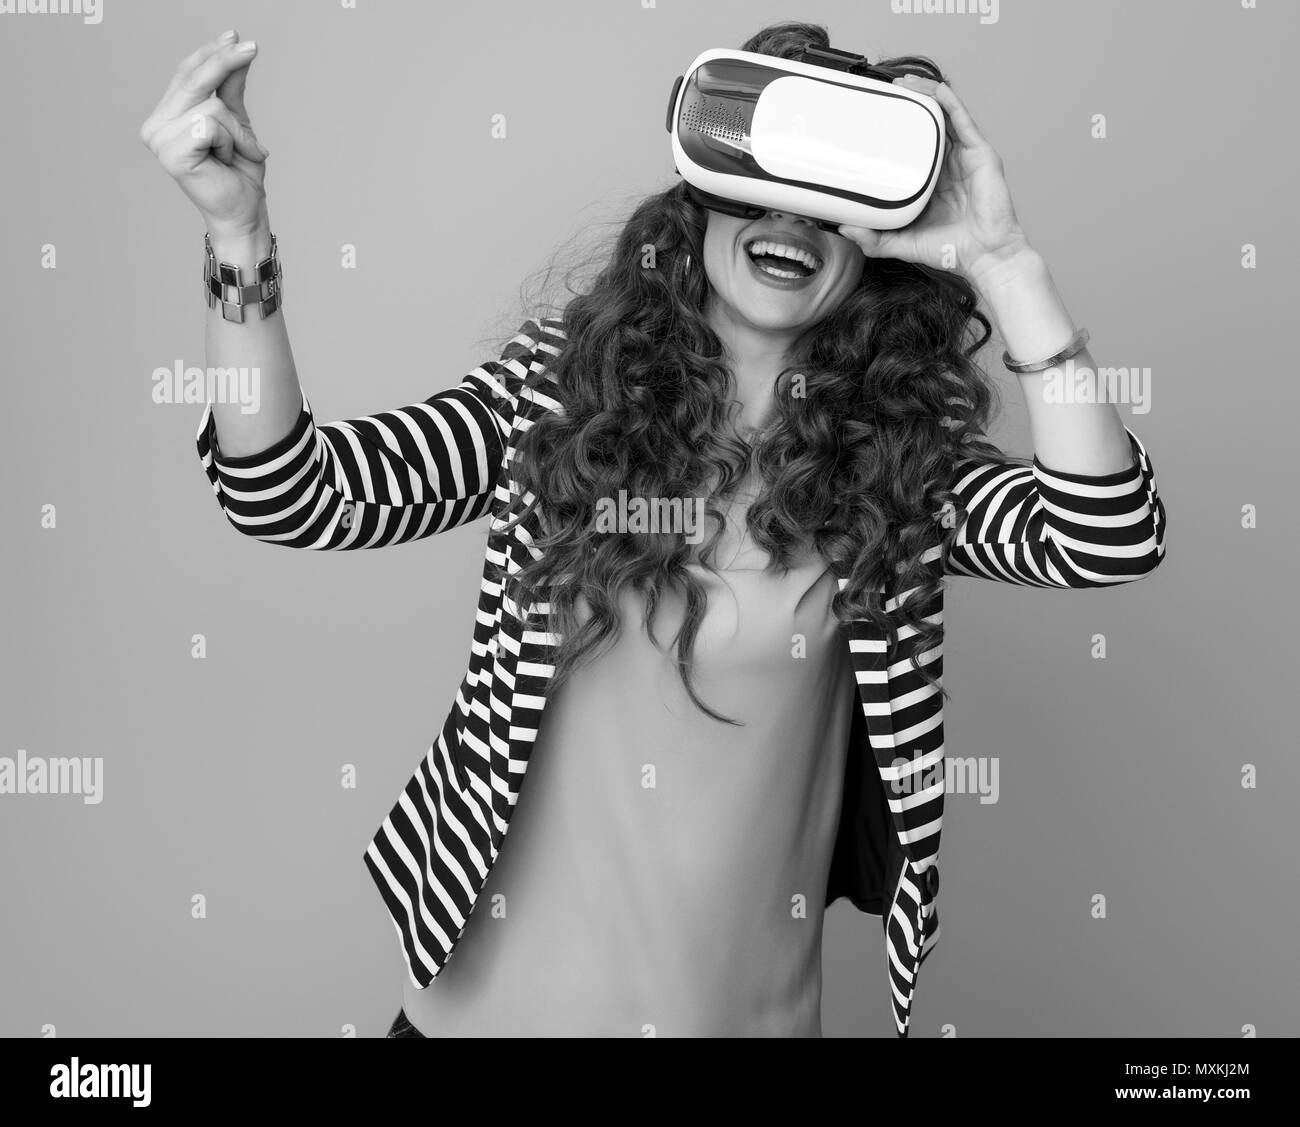 happy stylish woman with long wavy brunette hair against background using virtual reality gear and snapping fingers Stock Photo